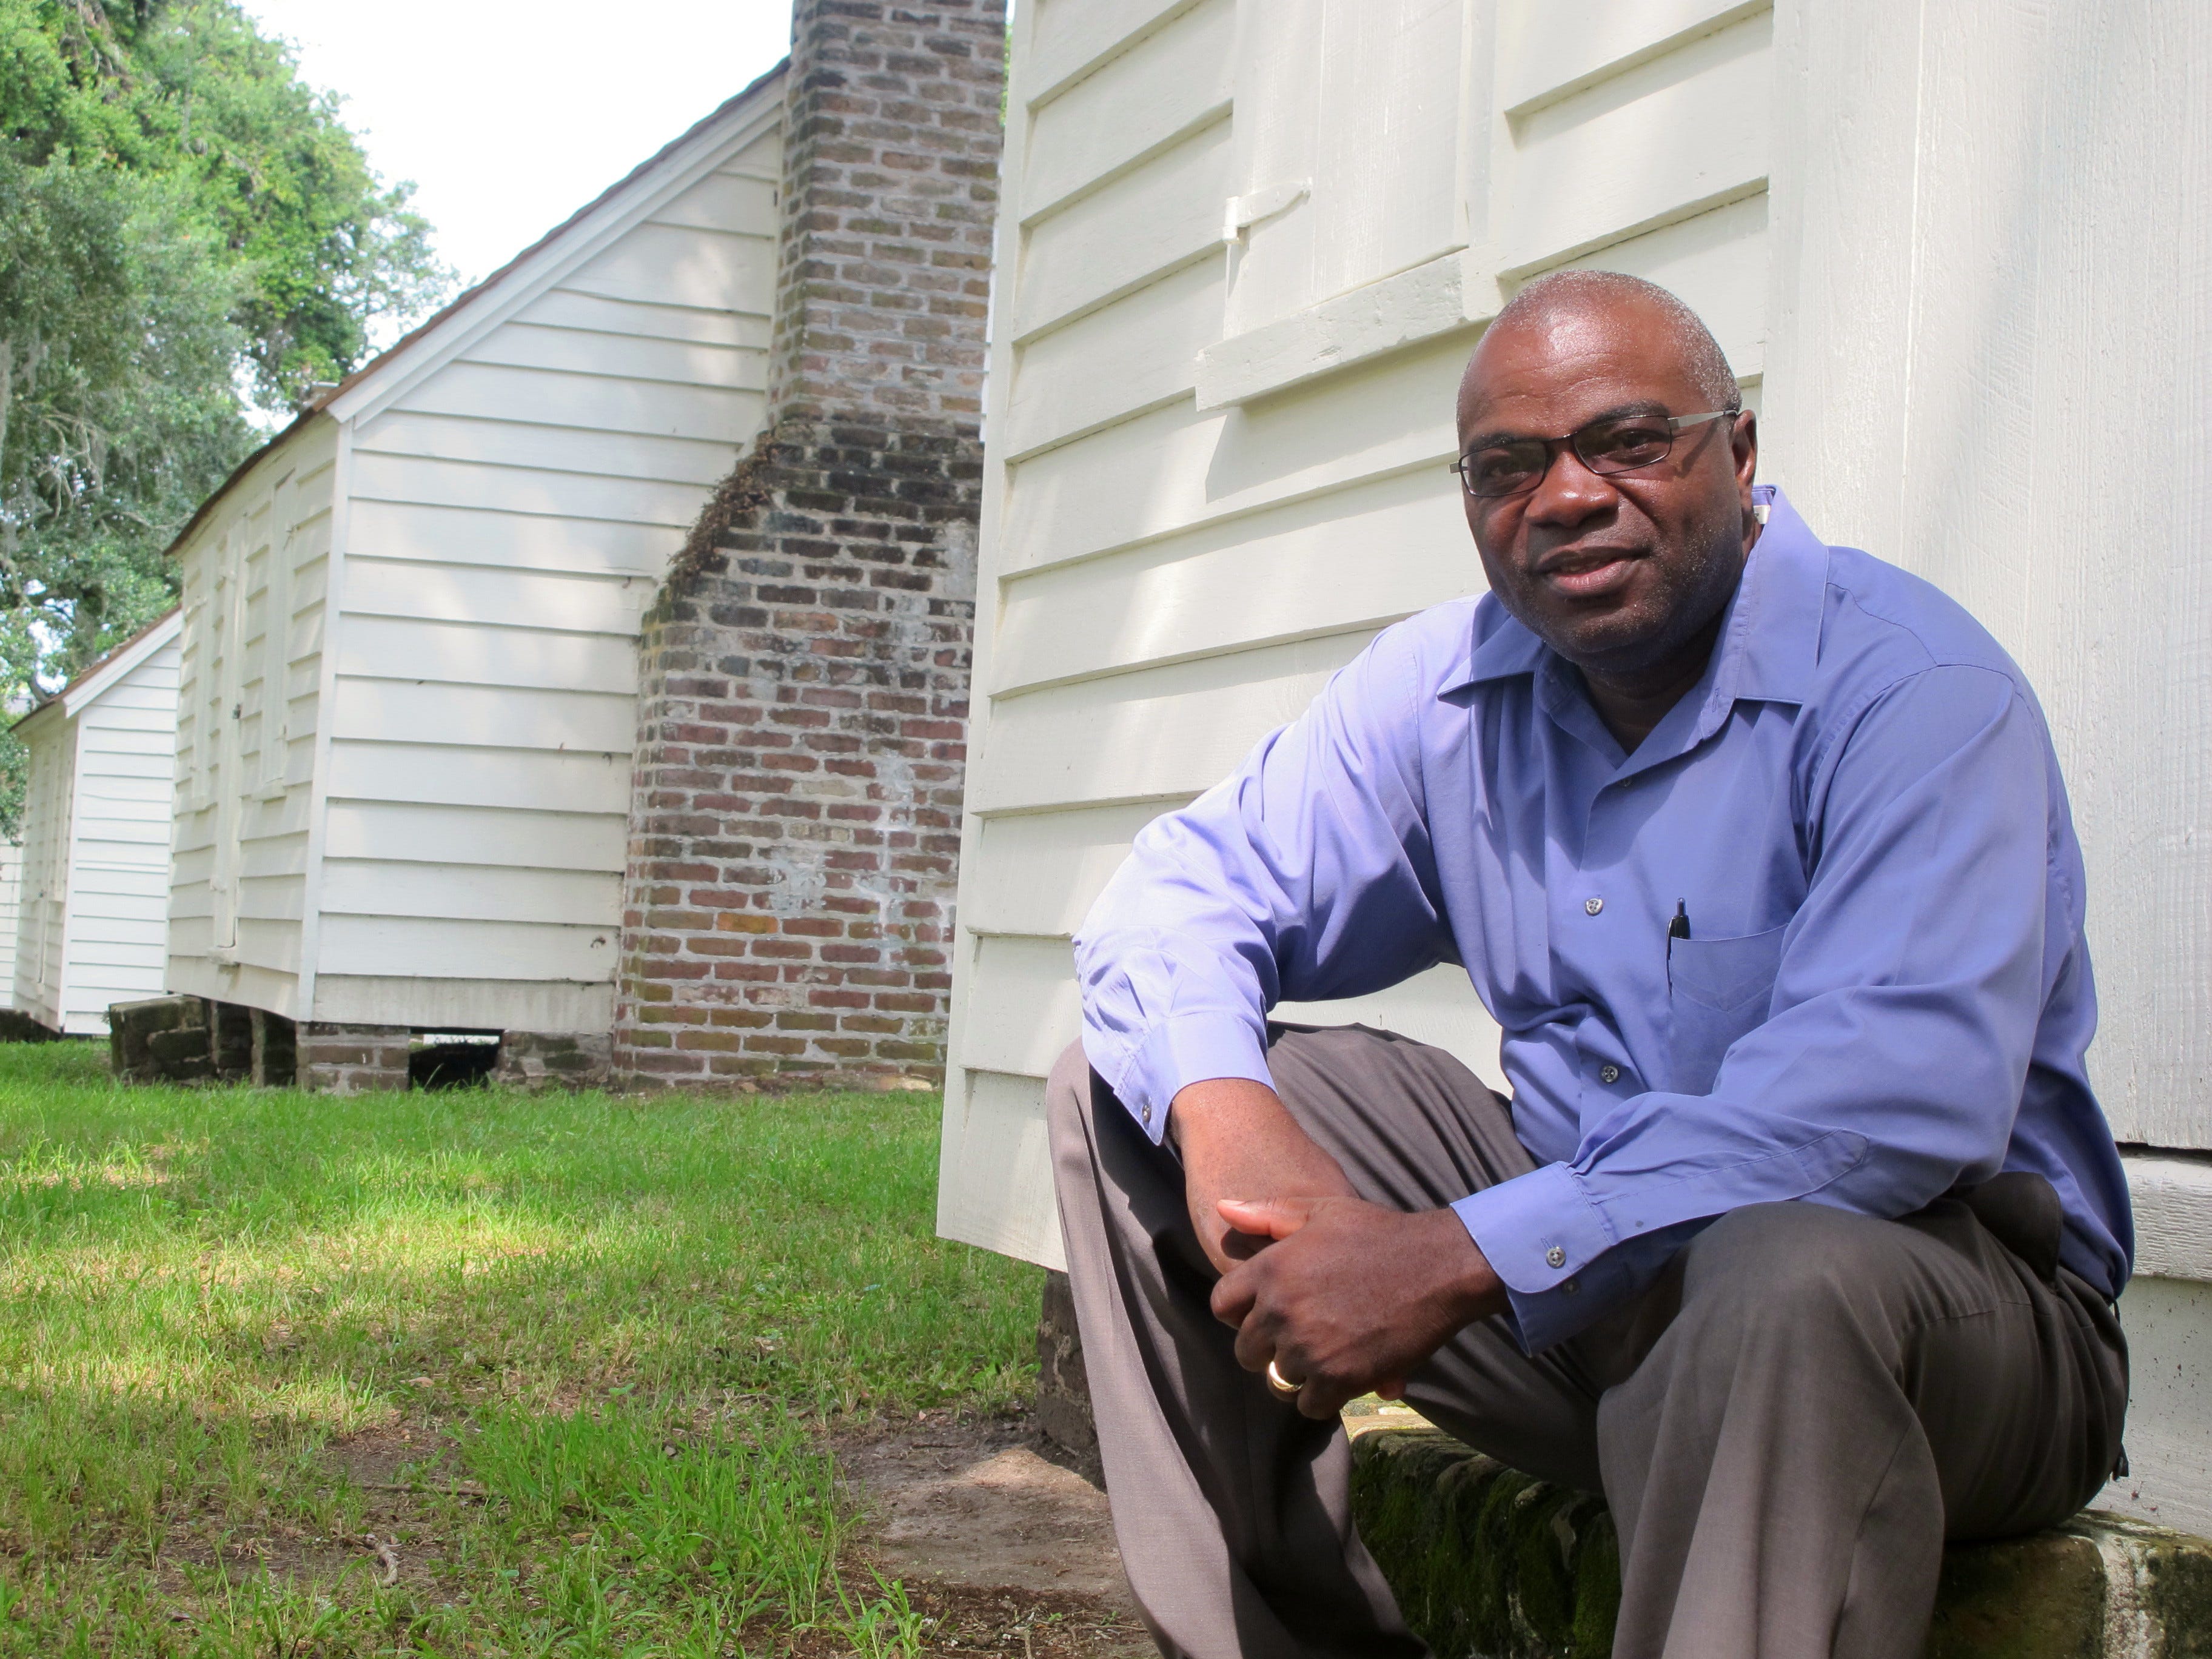 Joe McGill of the National Trust For Historic Preservation sits outside one of the slave cabins at McLeod Plantation in Charleston, S.C. As part of the Slave Dwelling Project, McGill has slept in old slave dwellings in a dozen states during the past three years.